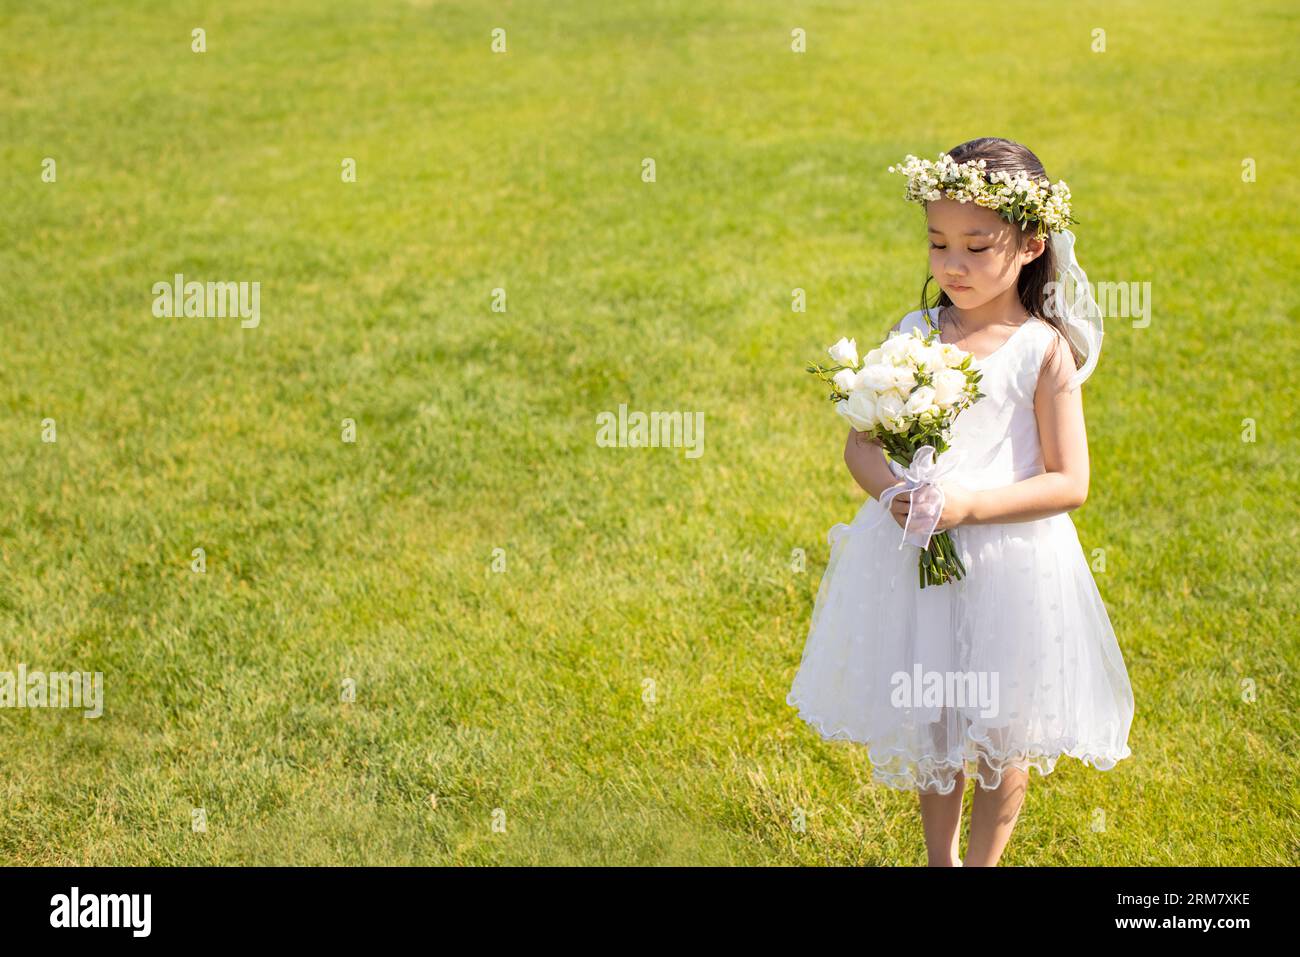 Cute flower girl holding a bunch of flowers Stock Photo